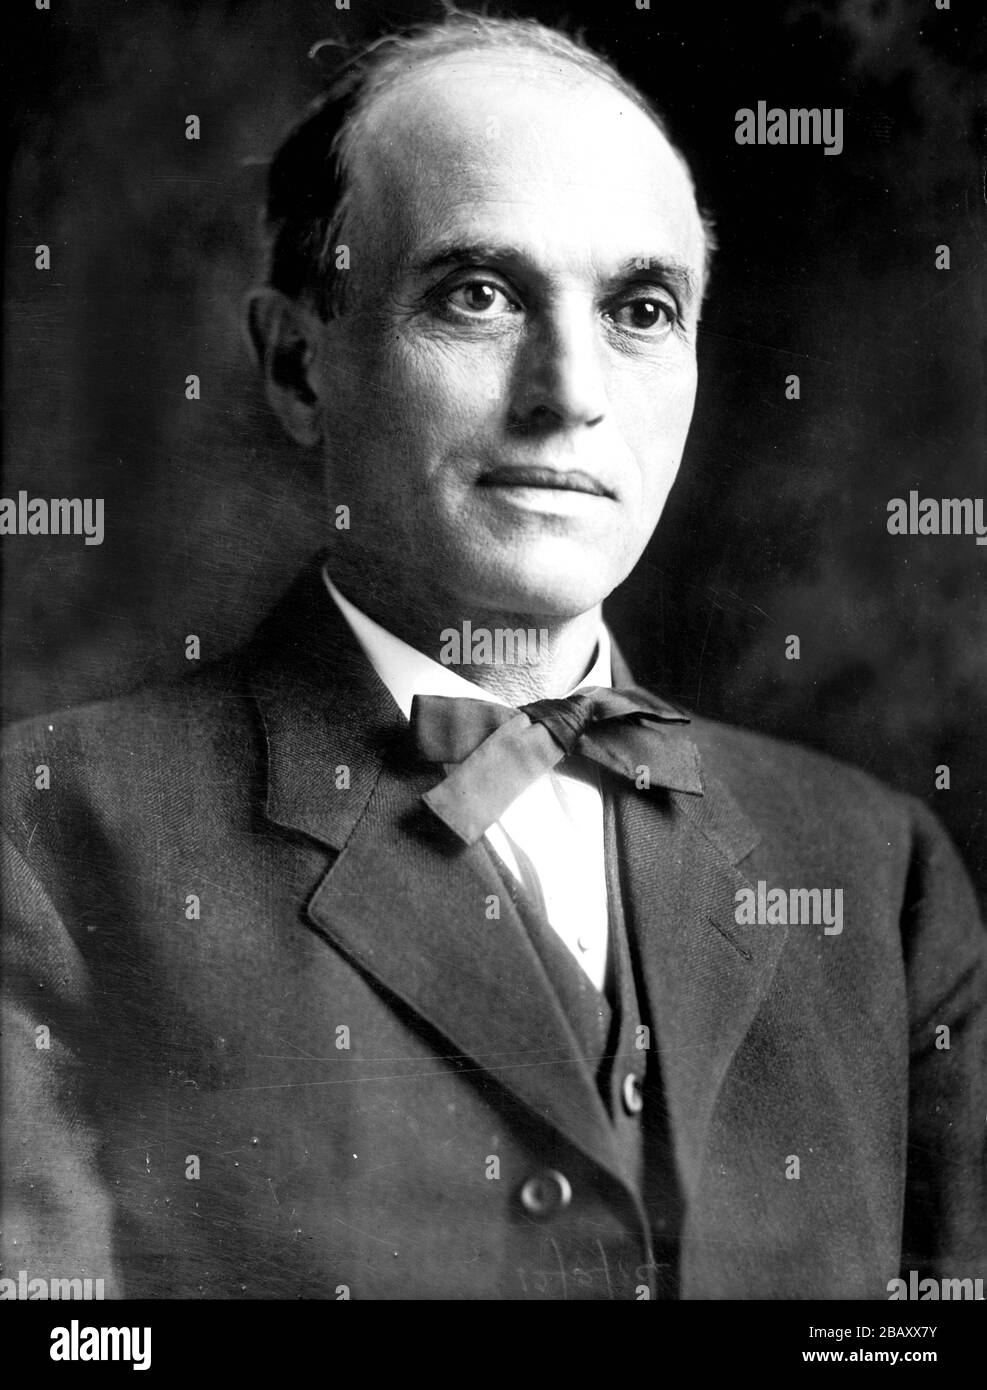 'Moses Alexander  English: Photograph shows Moses Alexander (1853-1932), second elected Jewish governor of a U.S. state and 11th governor of Idaho from 1915-1919. (Source: Flickr Commons project, 2011); from circa 1910 date QS:P,+1910-00-00T00:00:00Z/9,P1480,Q5727902 until circa 1915 date QS:P,+1915-00-00T00:00:00Z/9,P1480,Q5727902; This image  is available from the United States Library of Congress's Prints and Photographs division under the digital ID ggbain.17930.This tag does not indicate the copyright status of the attached work. A normal copyright tag is still required. See Commons:Licen Stock Photo